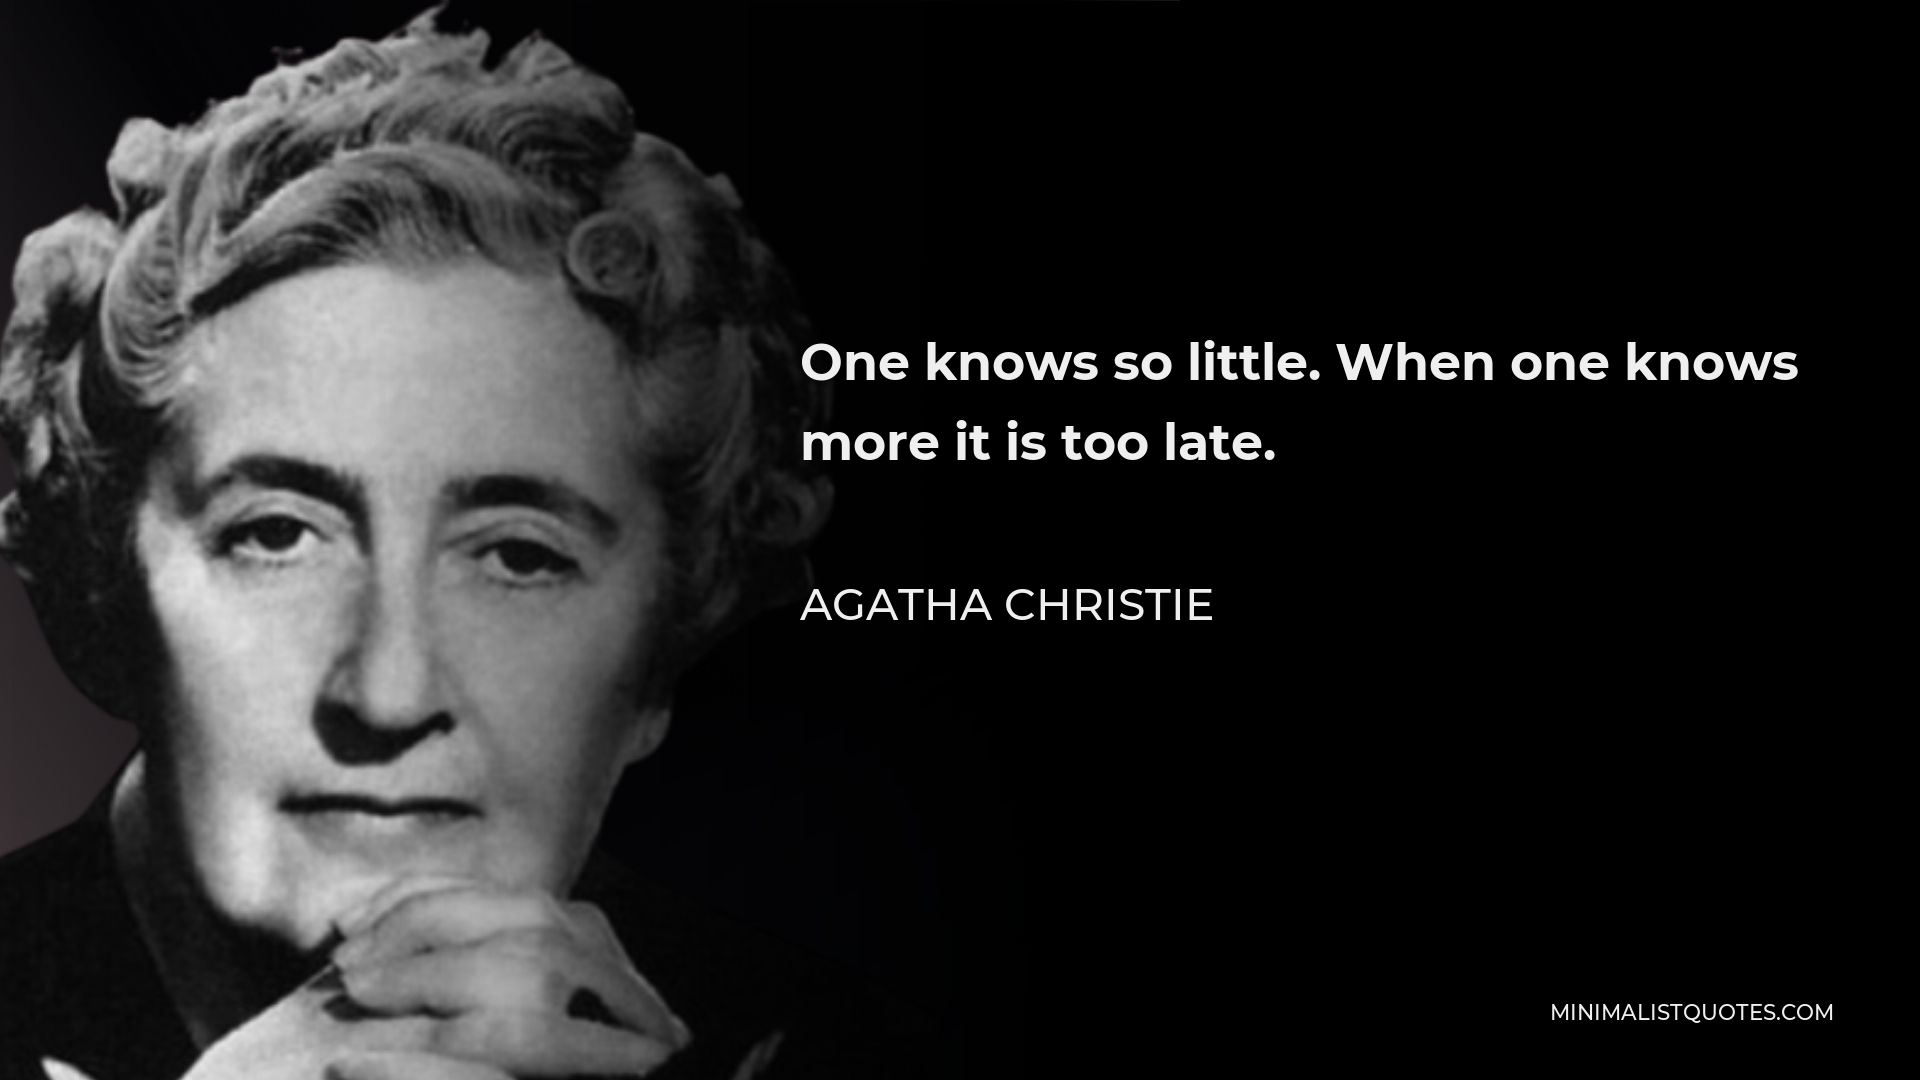 Agatha Christie Quote - One knows so little. When one knows more it is too late.